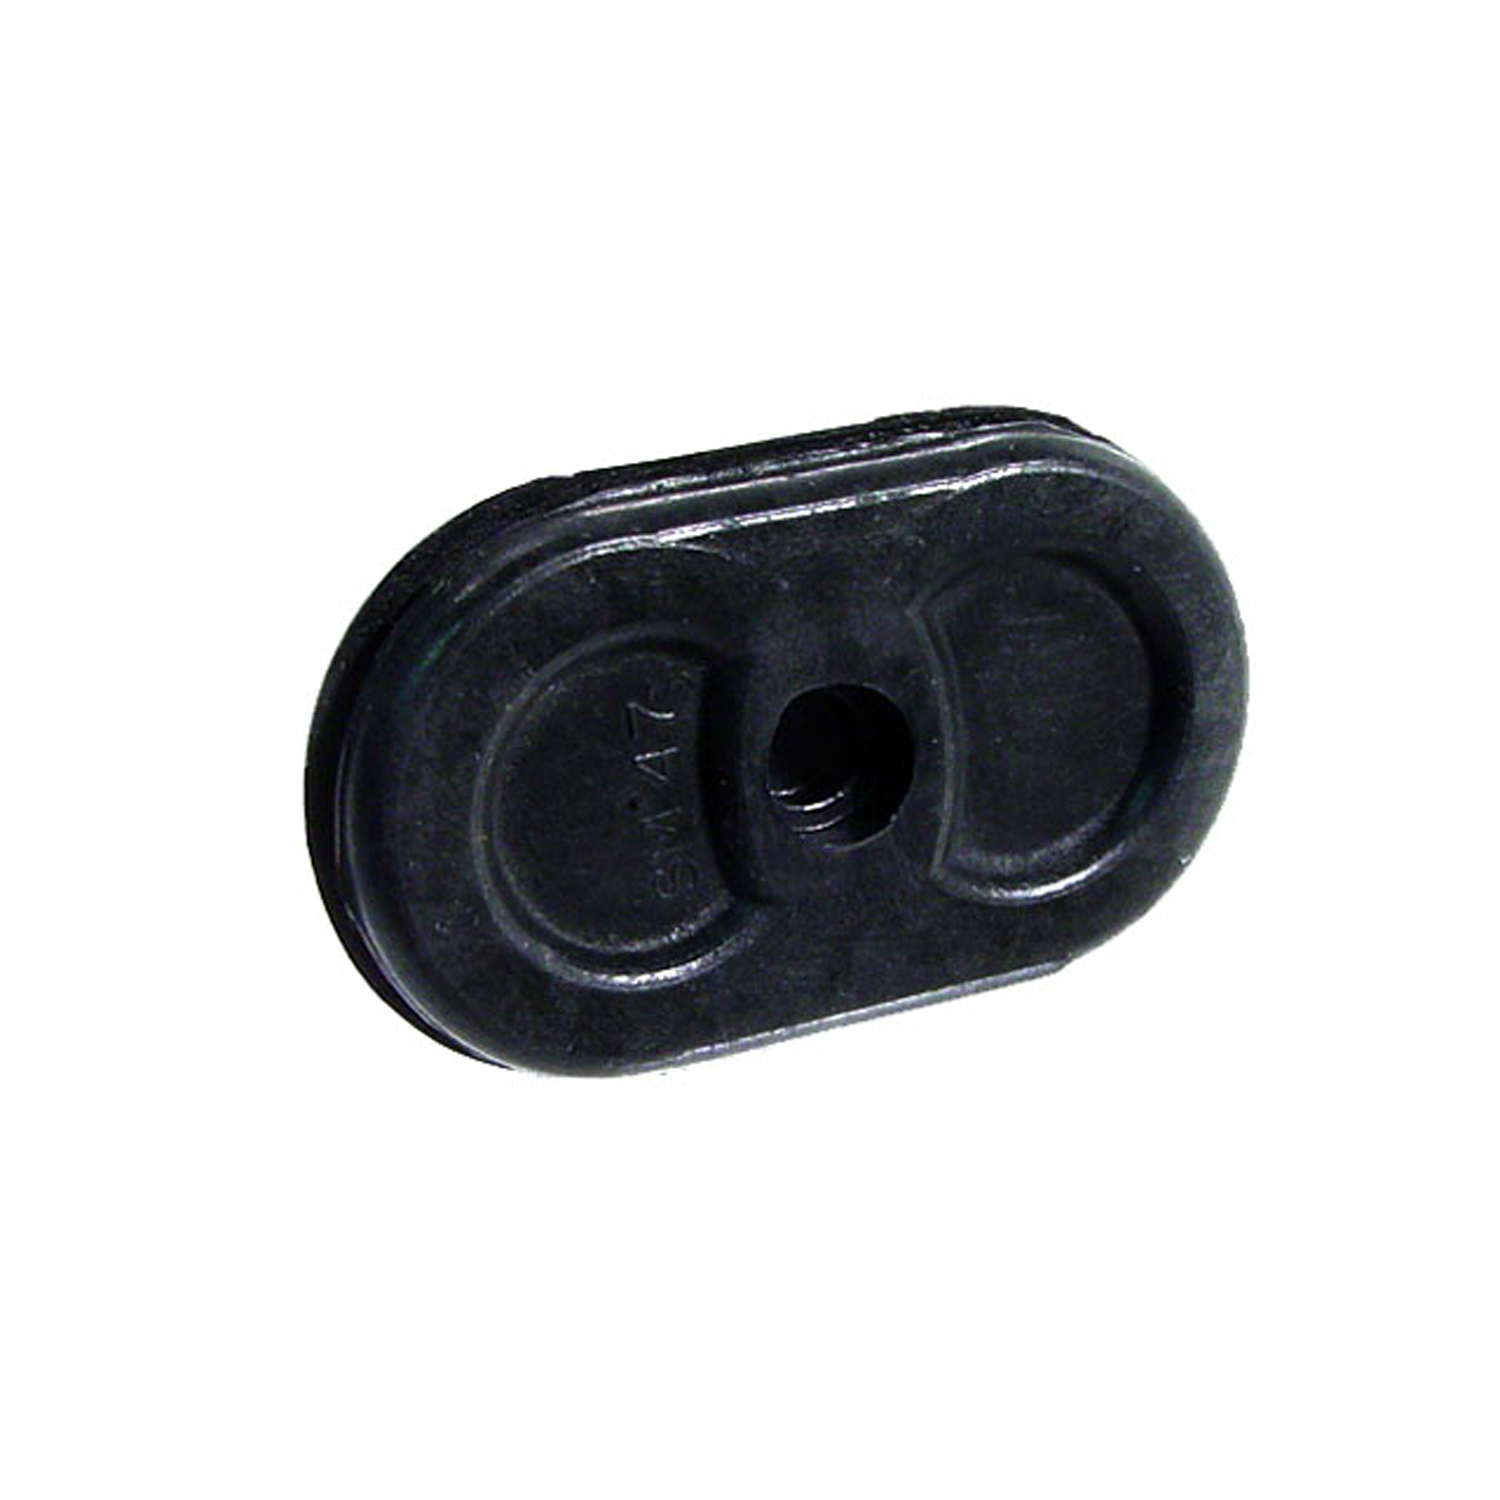 1940 Cadillac Series 90 Speedometer Cable Firewall Grommet.  Fits 1-7/8 long hole-SM 47